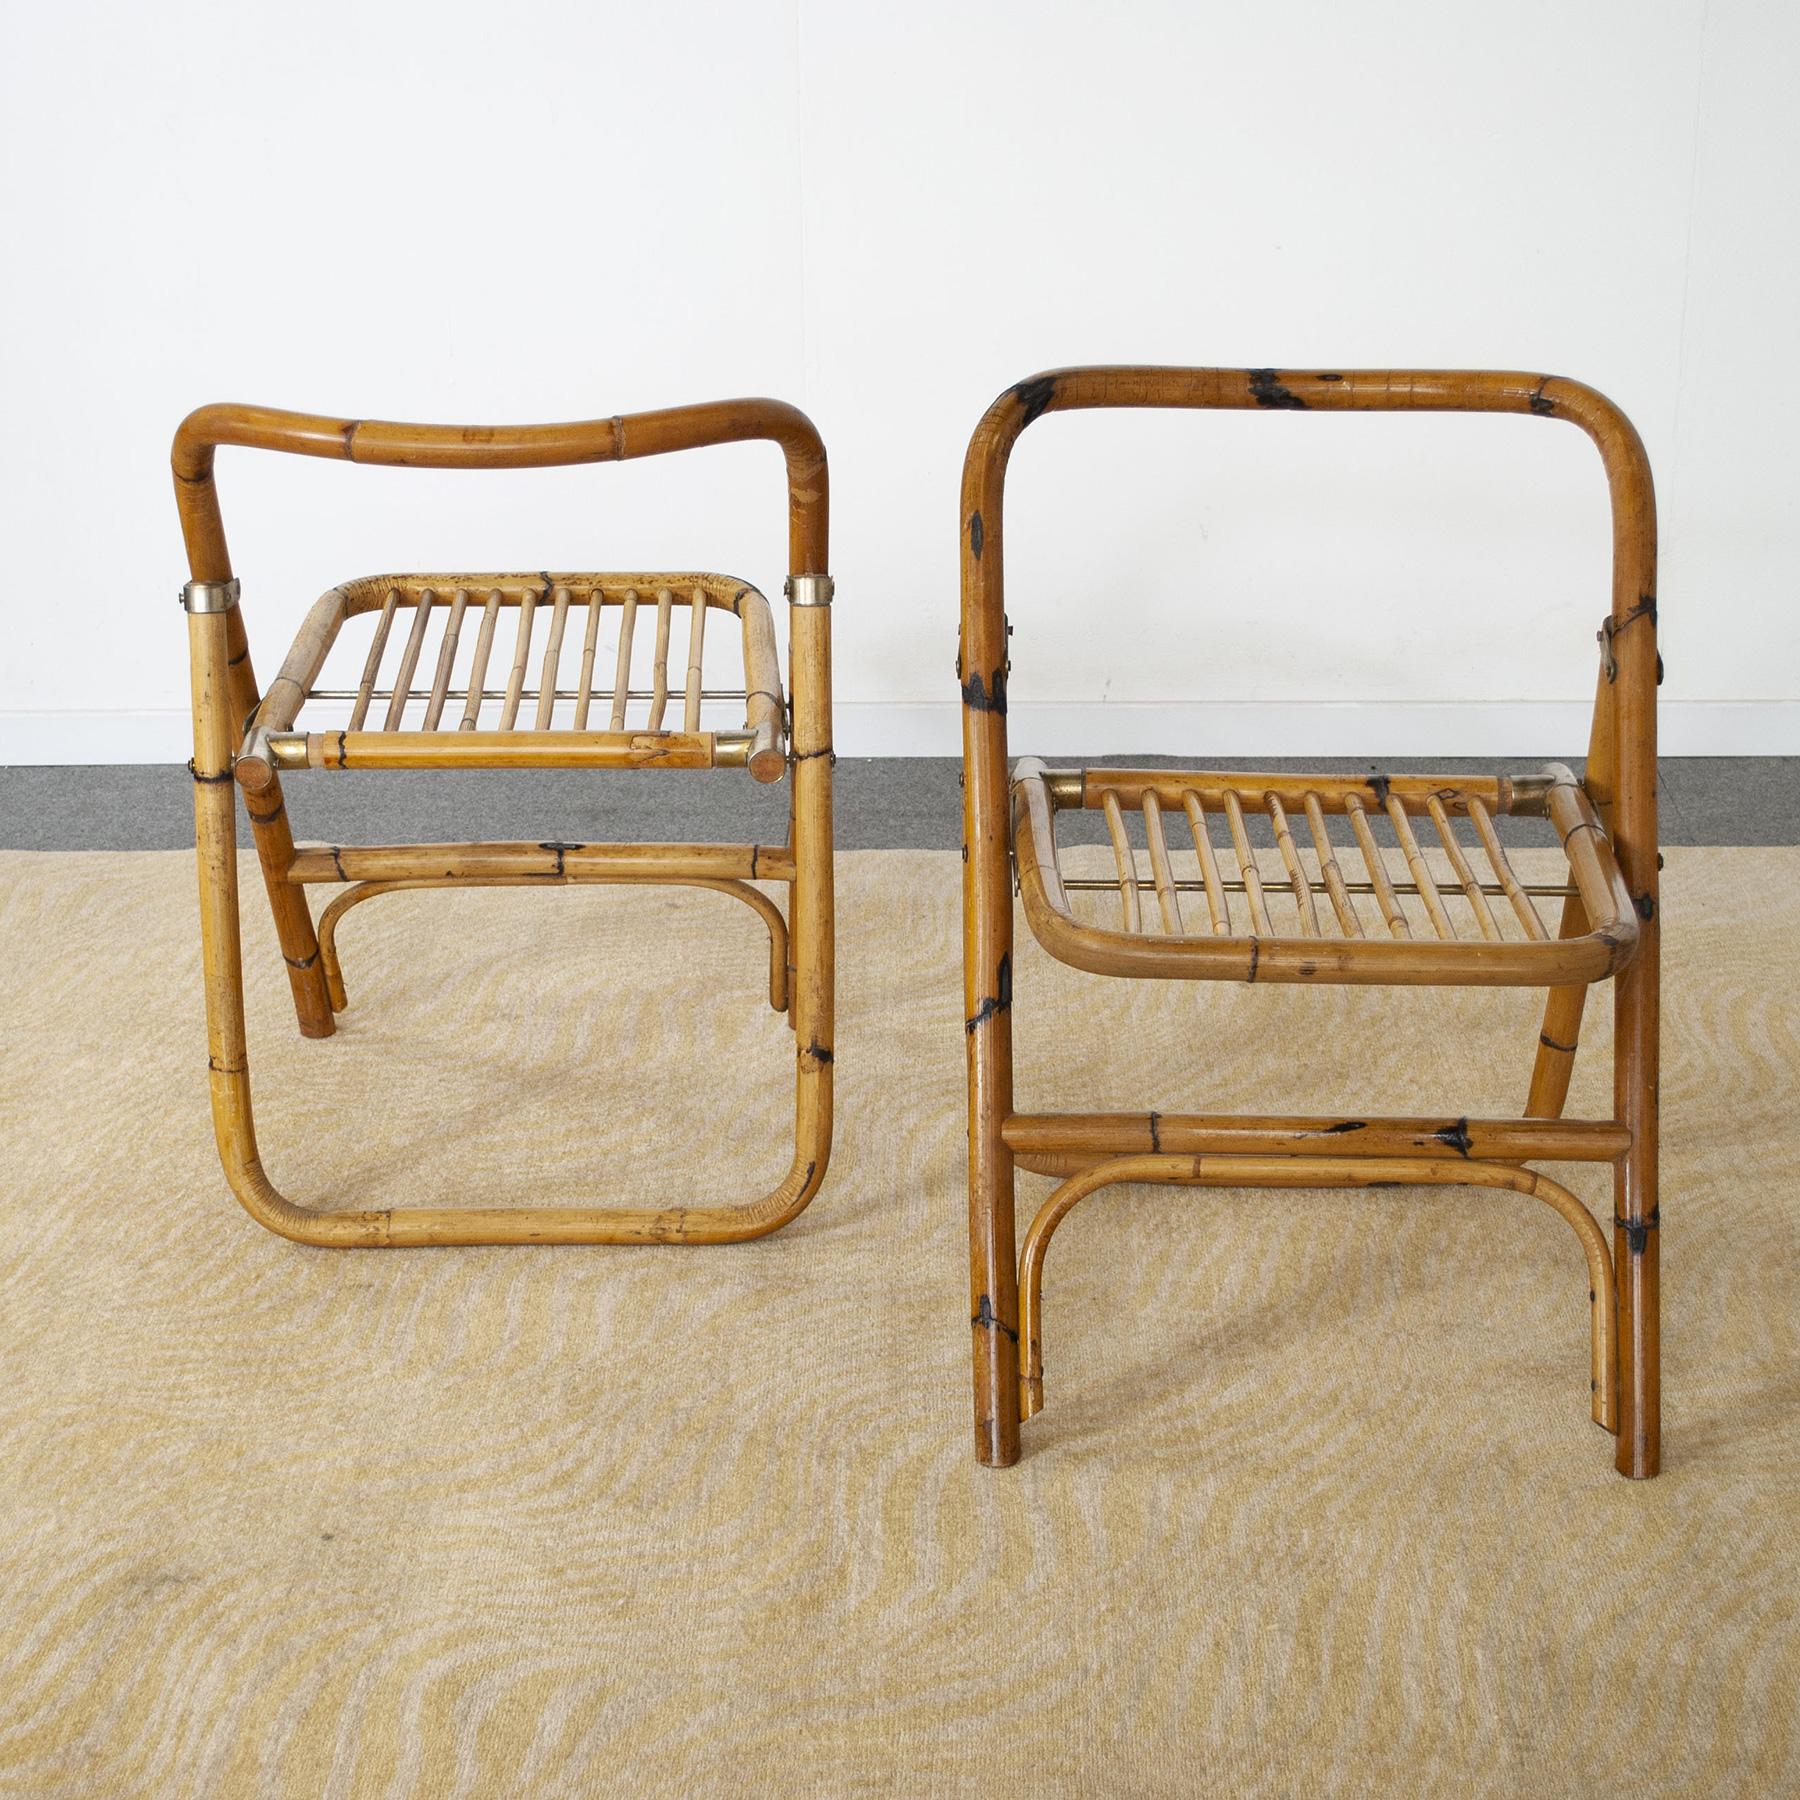 Mid-20th Century Dal Vera Italian Mid Century Pair of Bamboo Chairs For Sale